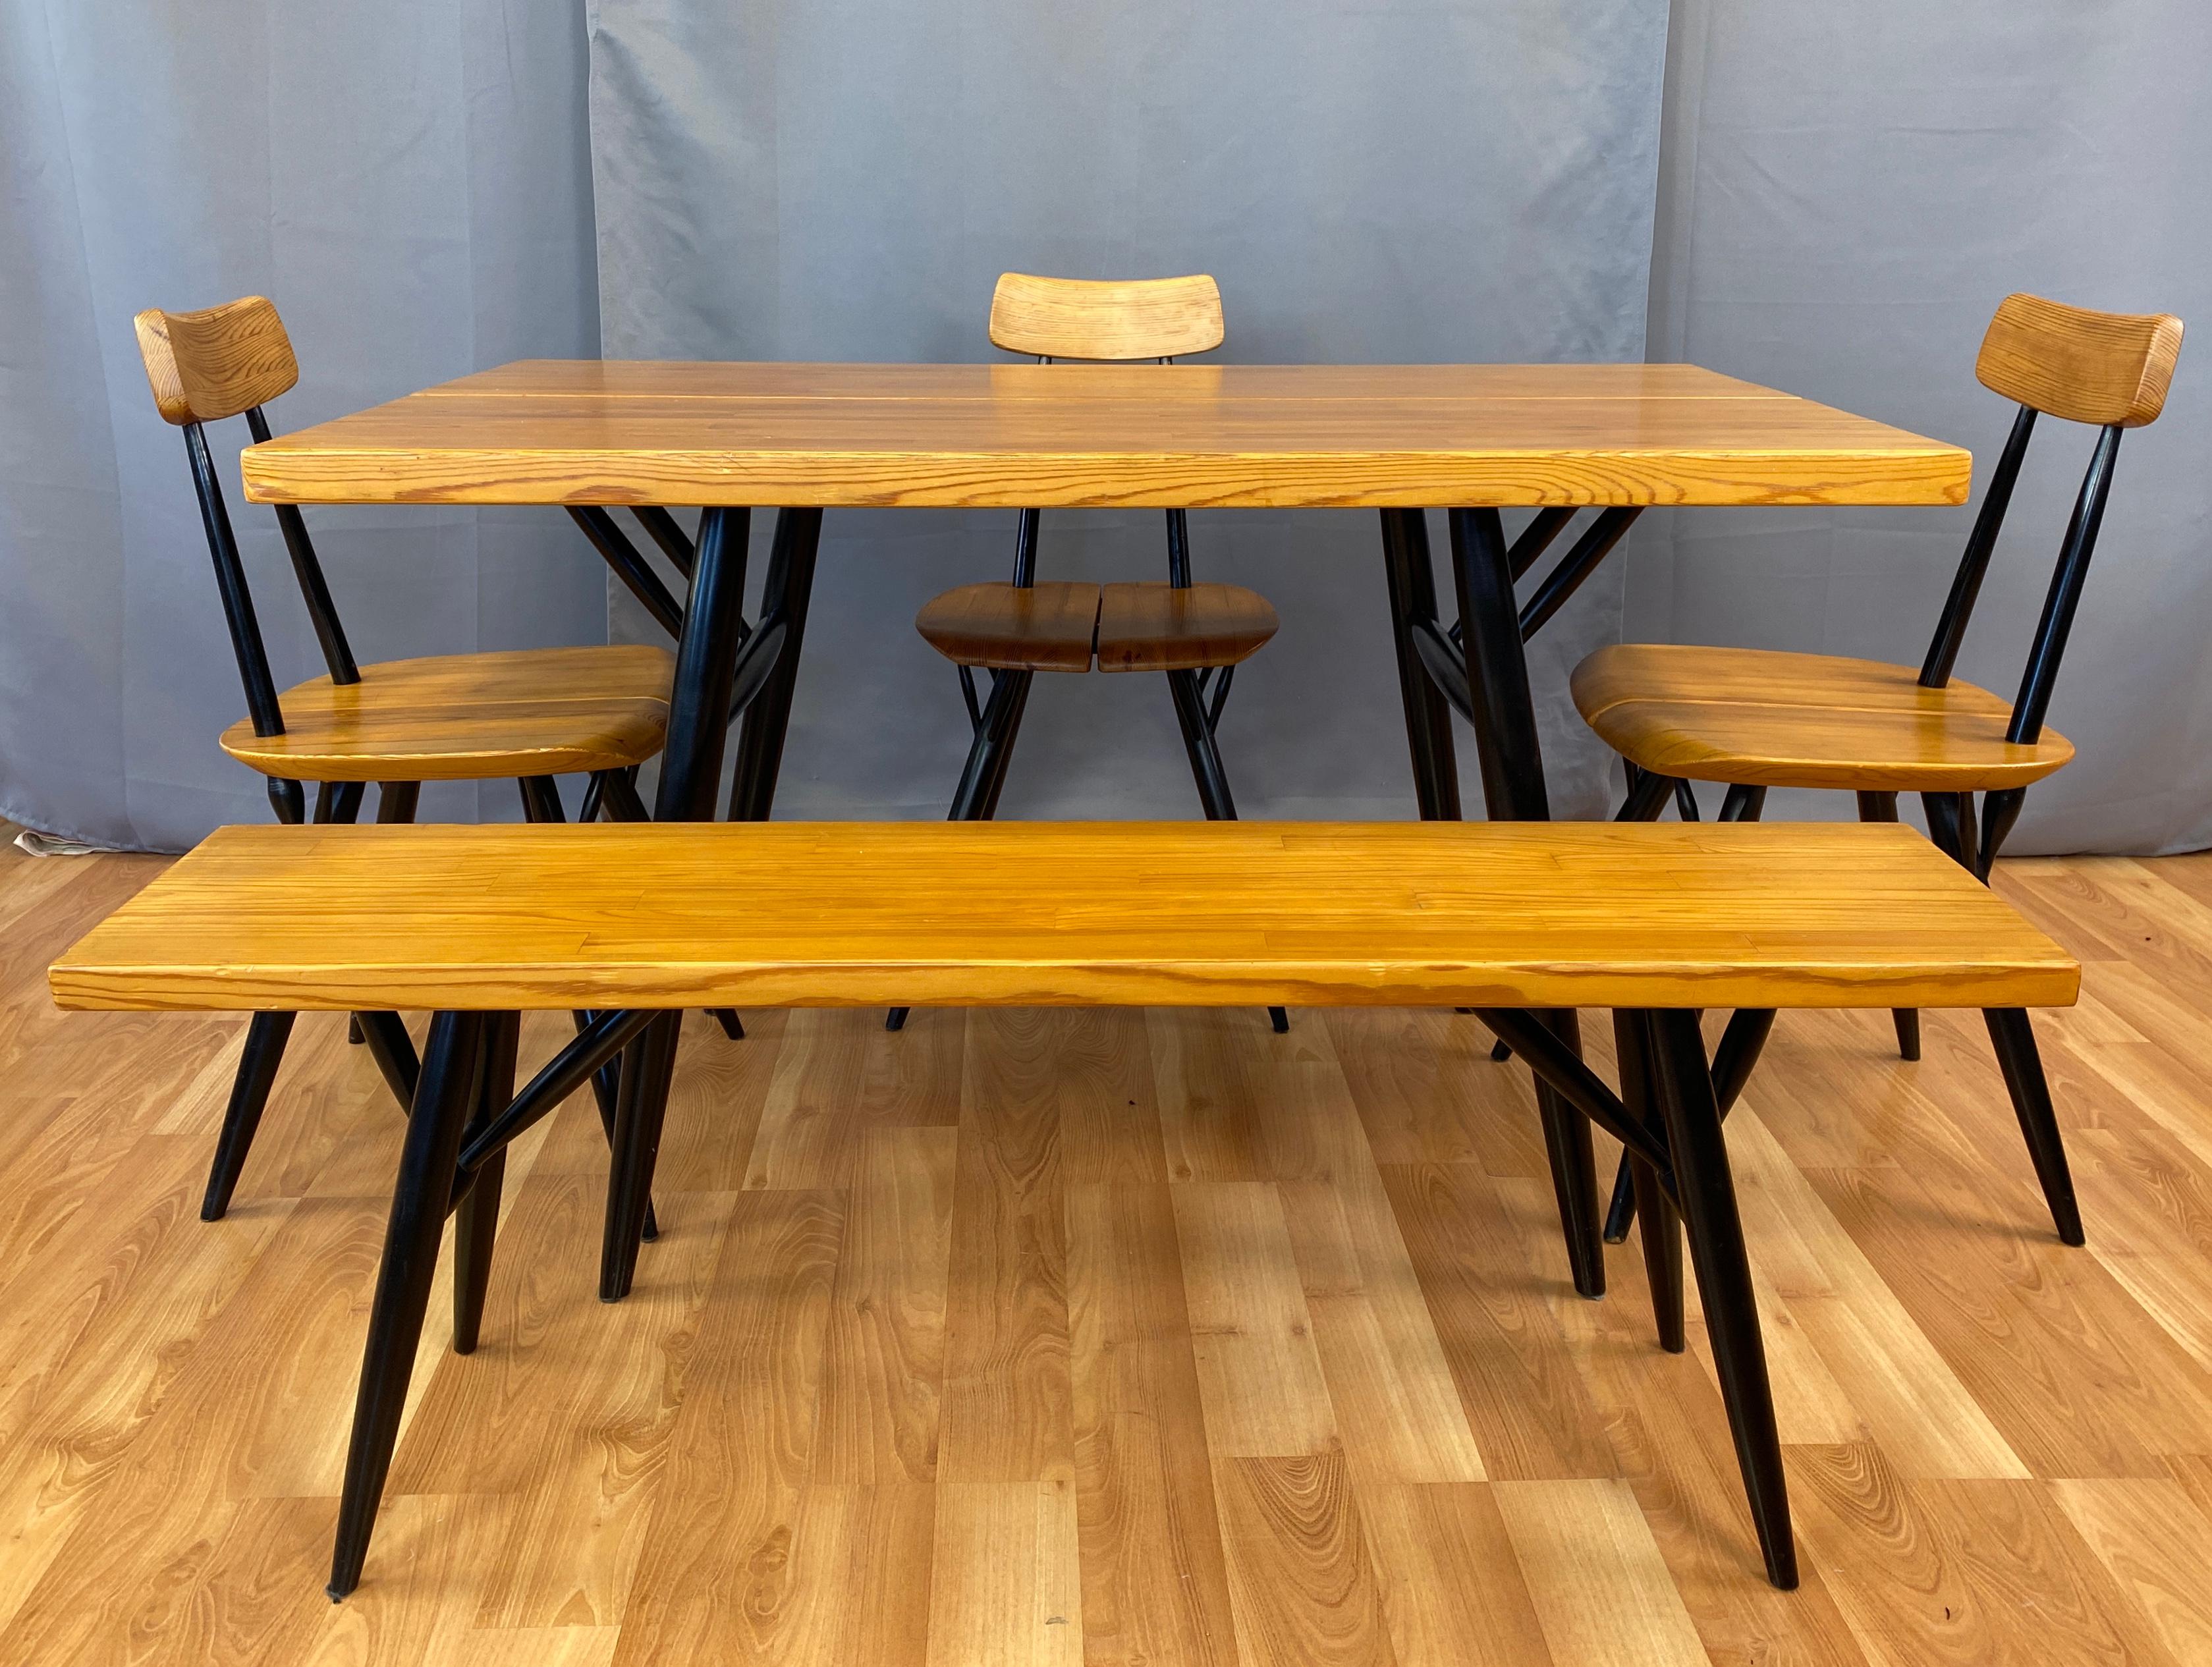 Offered here is a Ilmari Tapiovaara designed dining suite for Laukaan Pu called 